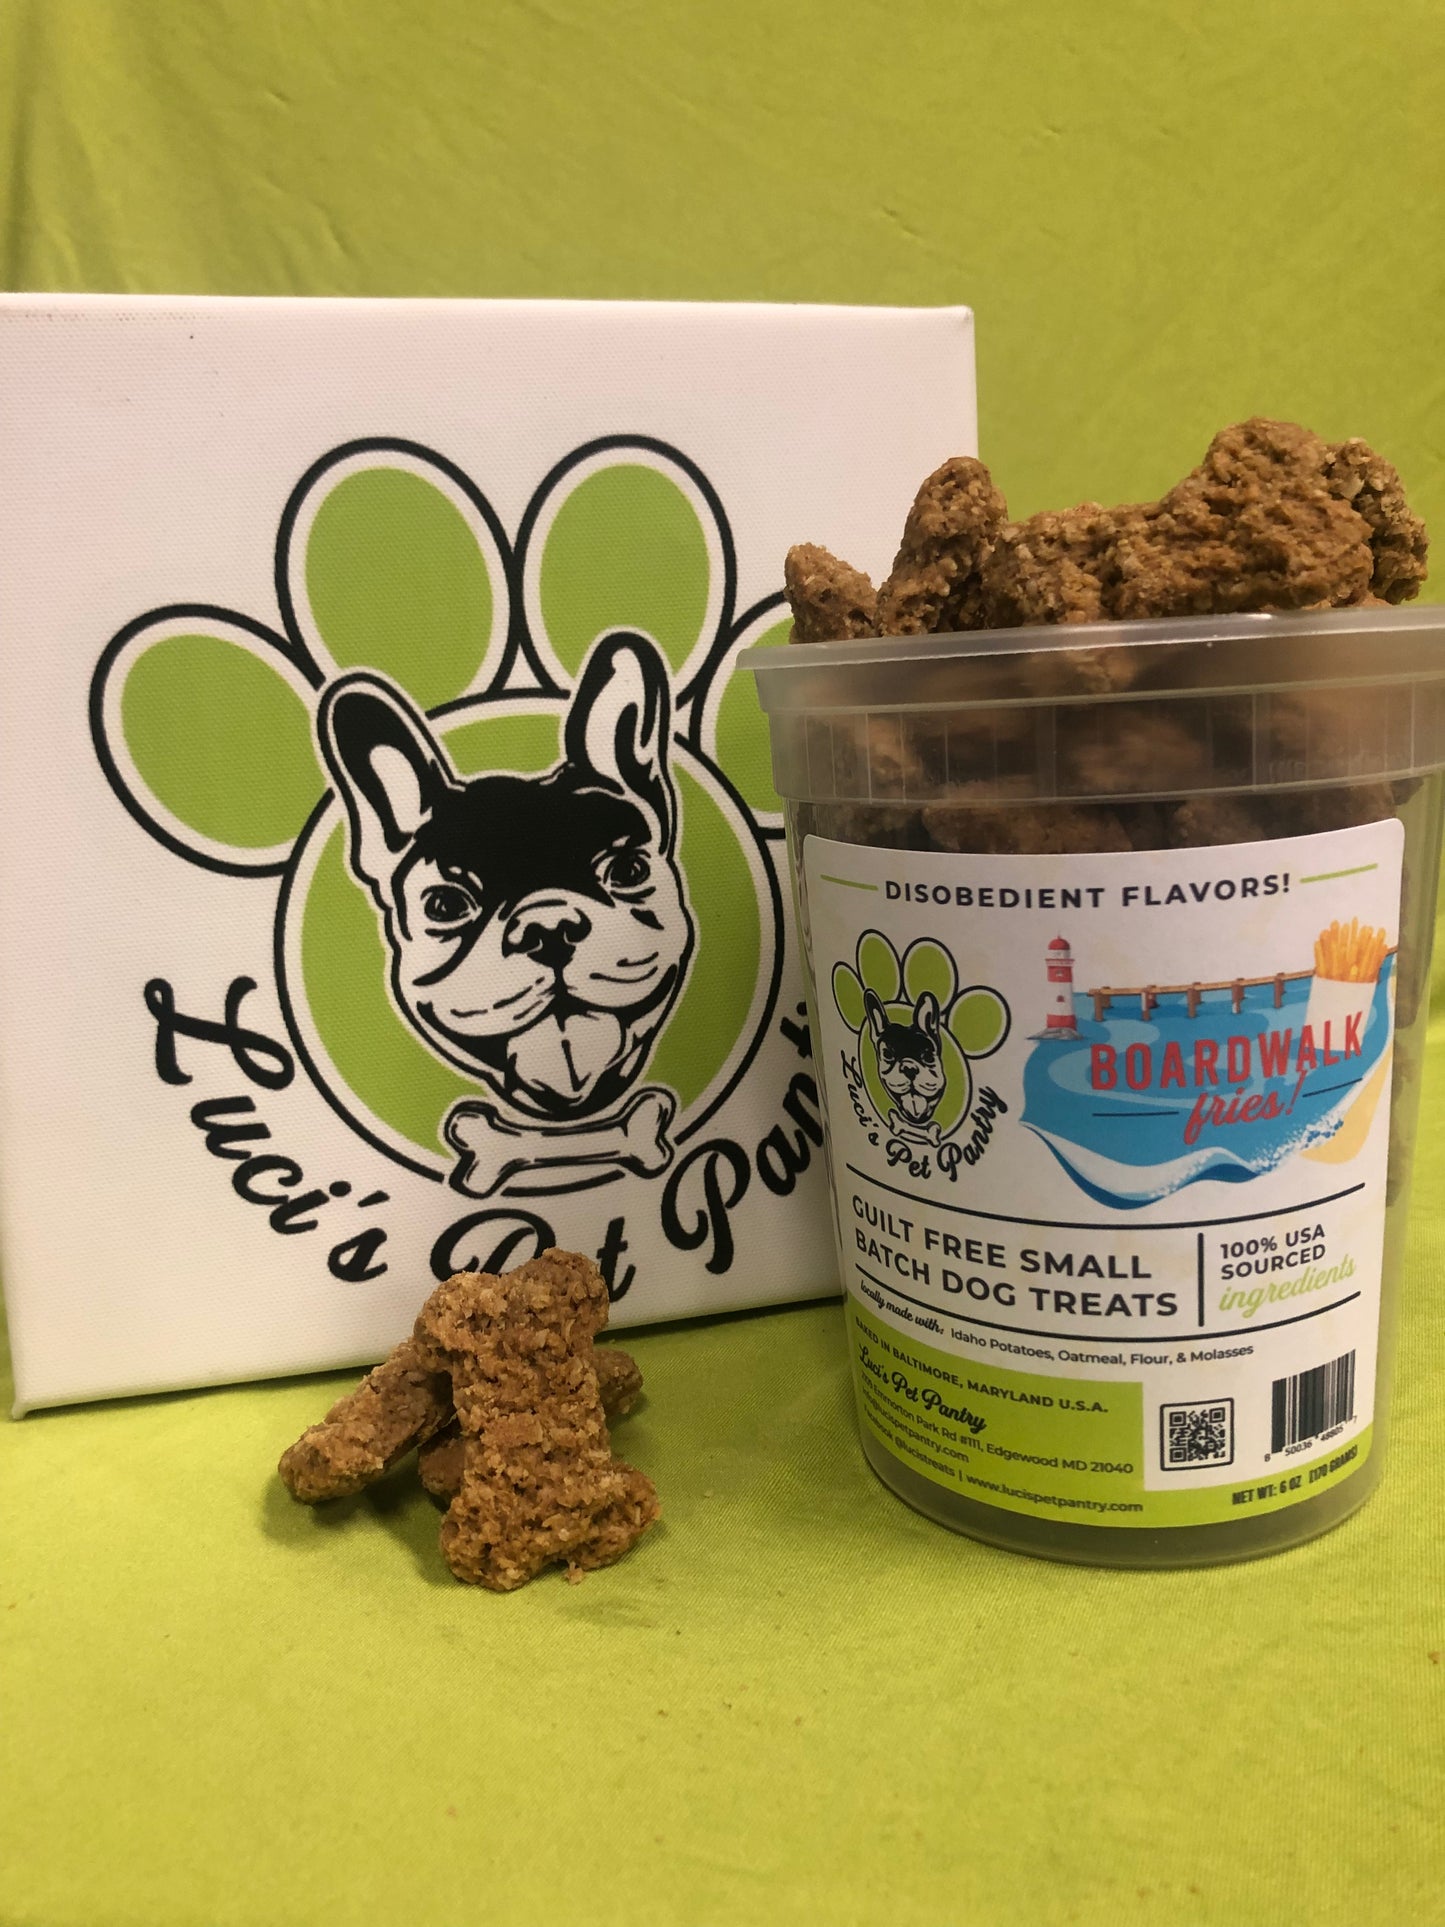 Boardwalk Fries - All Natural "Idaho Potato" Dog & Puppy Treats - Disobedient Tub of Biscuits